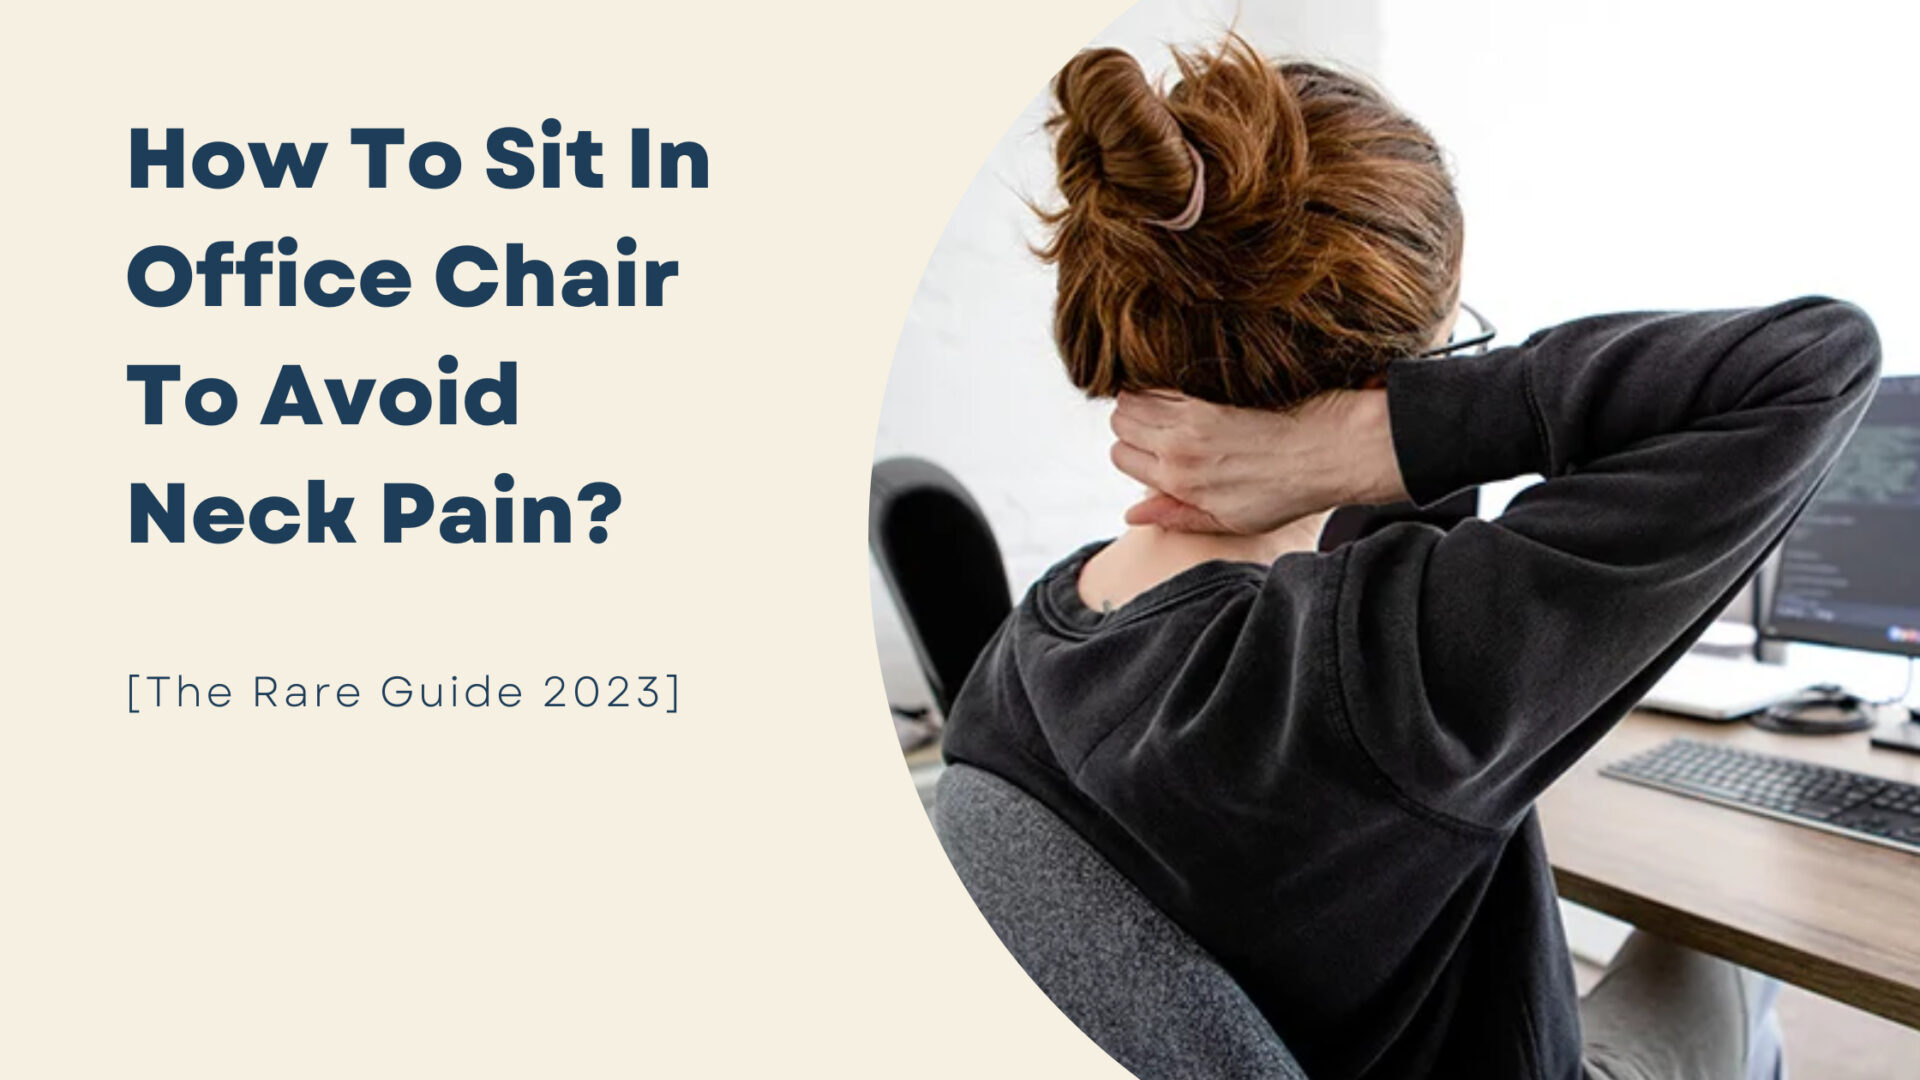 How To Sit In Office Chair To Avoid Neck Pain